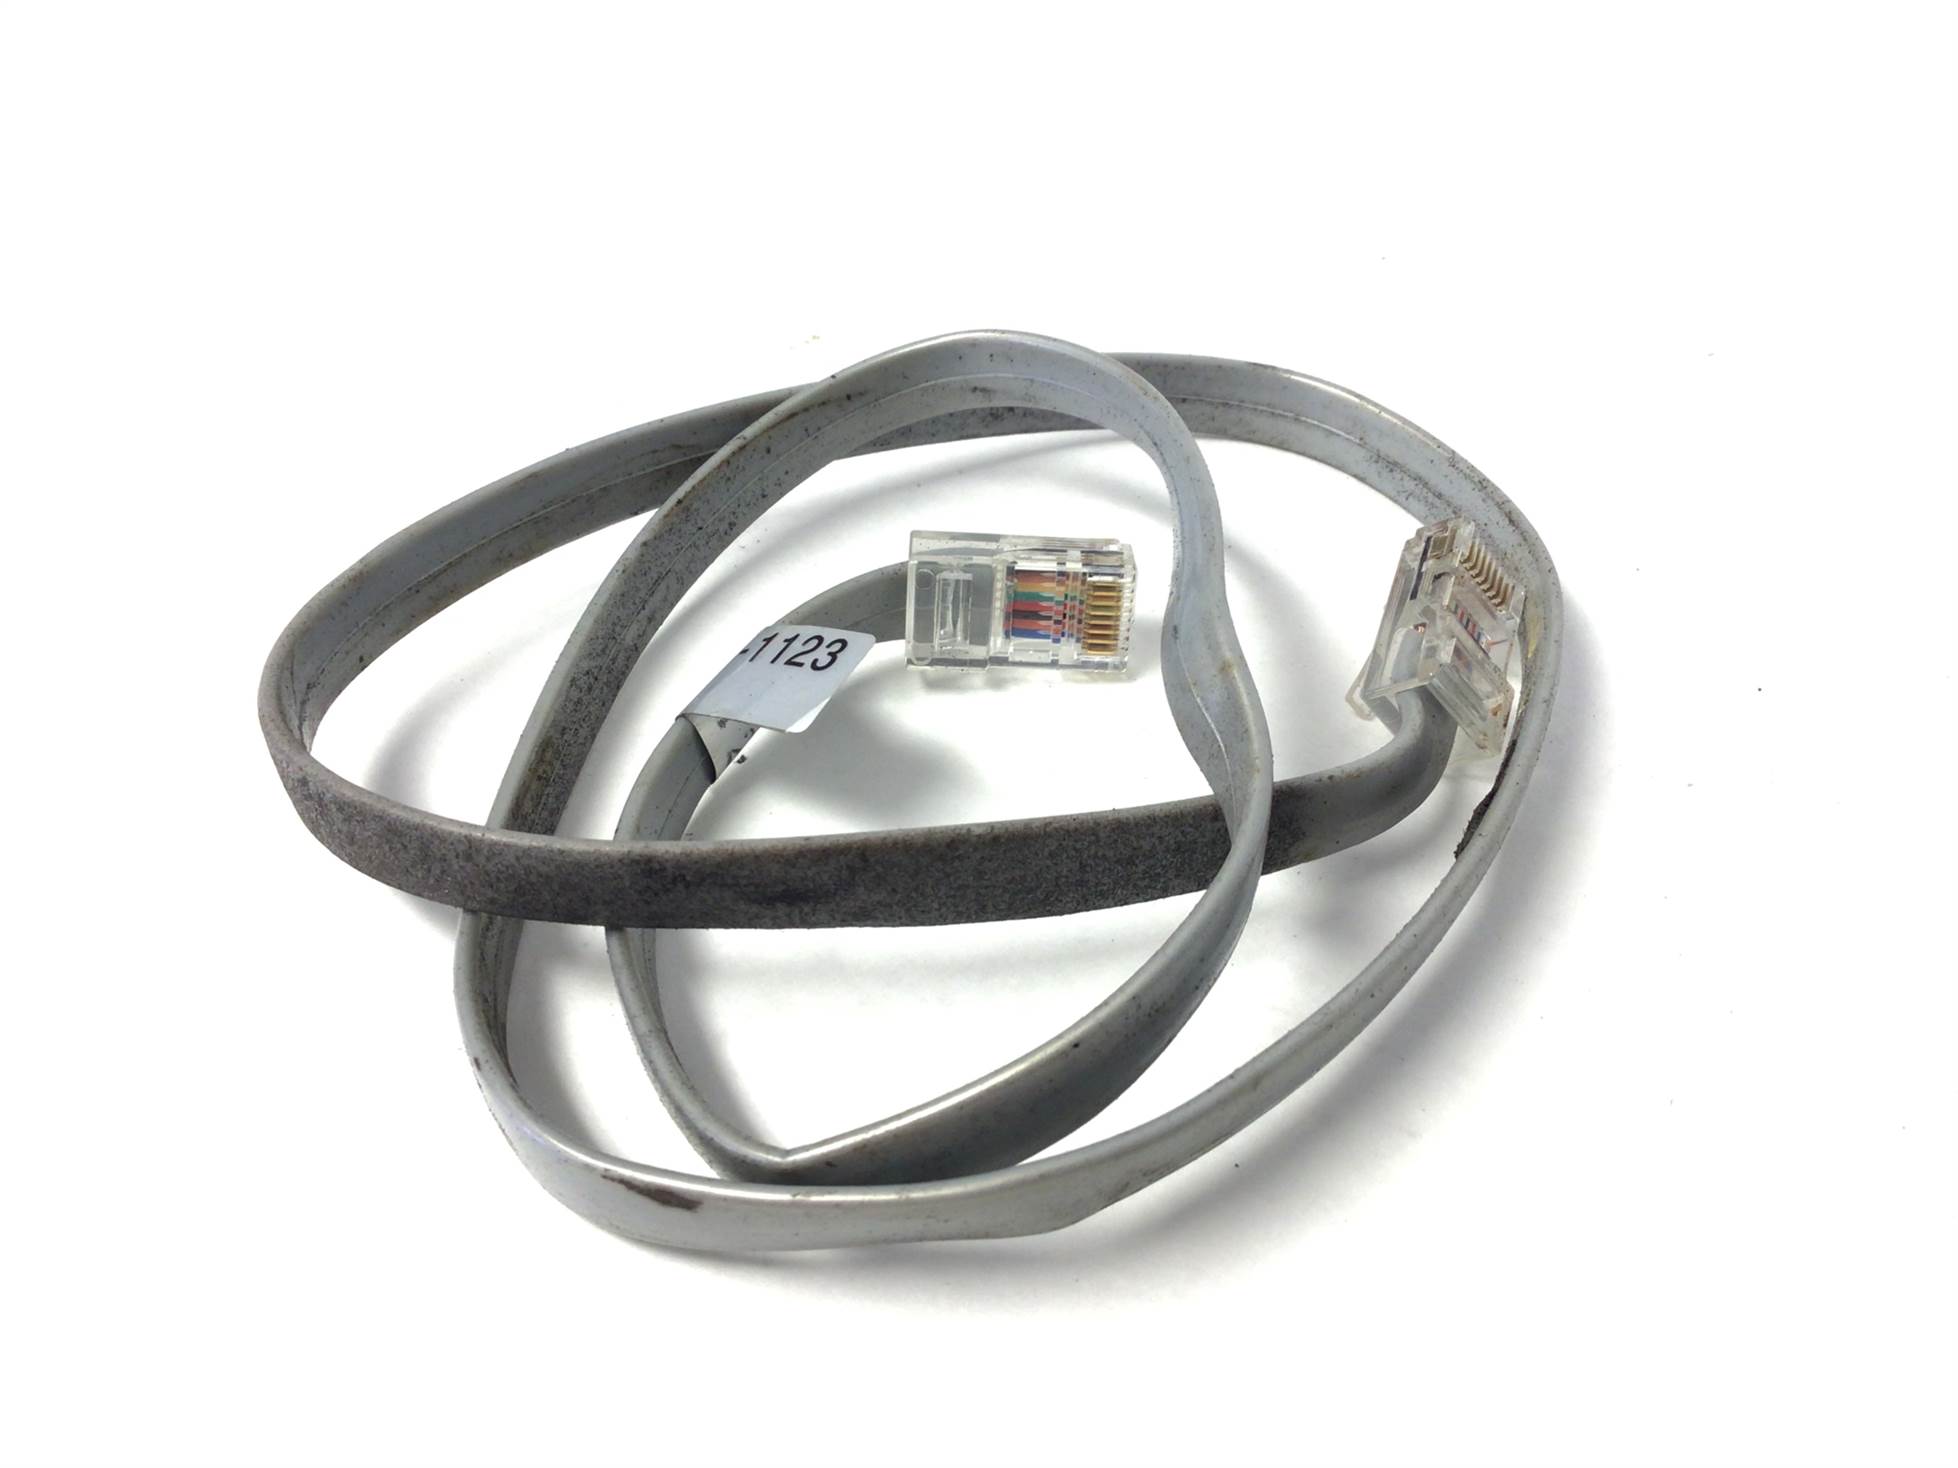 Harness Assy Csafe Extn (Used)